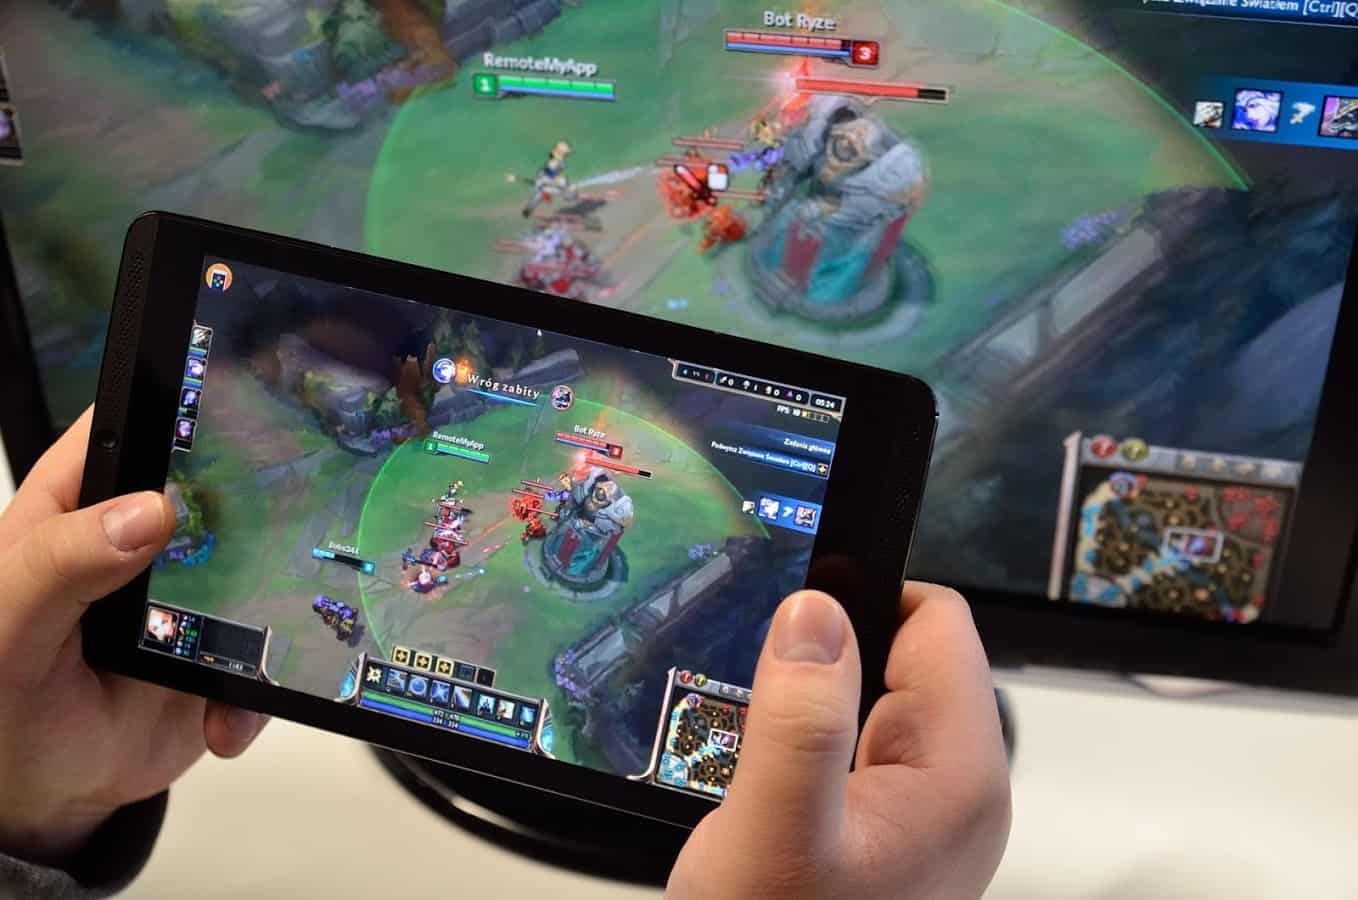 How to Play PC Games on Android